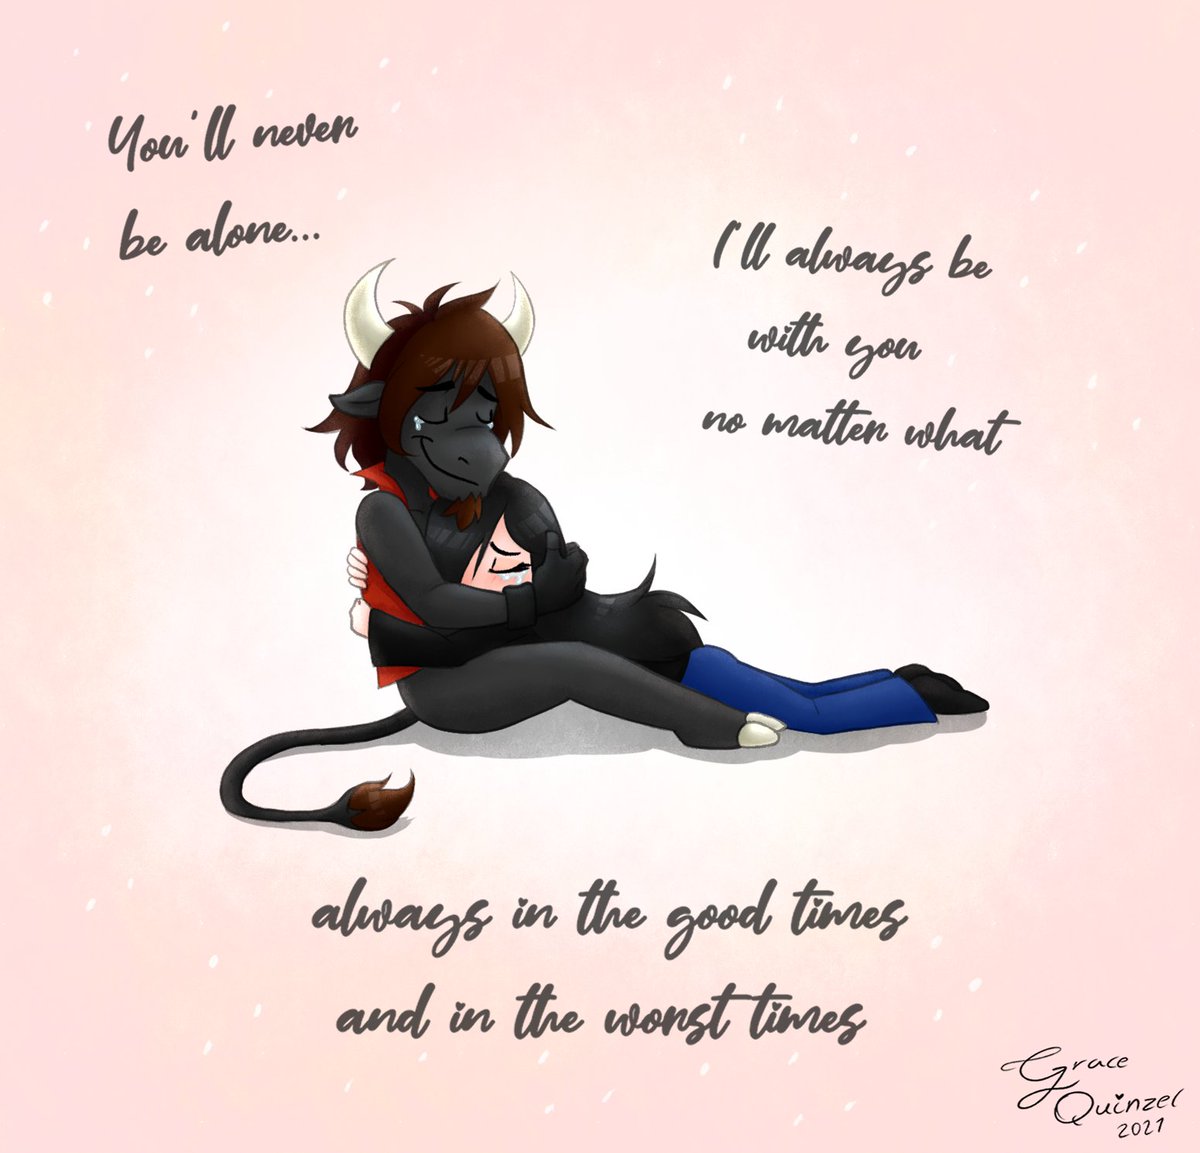 I know that I'm still absent, the school doesn't let me do much and the mentalbreakdowns don't help... But I wanted to do this for @WillKalen since he's been through a lot by his loss and needs a lot of love and support, I'll always be there for you when you need it most.